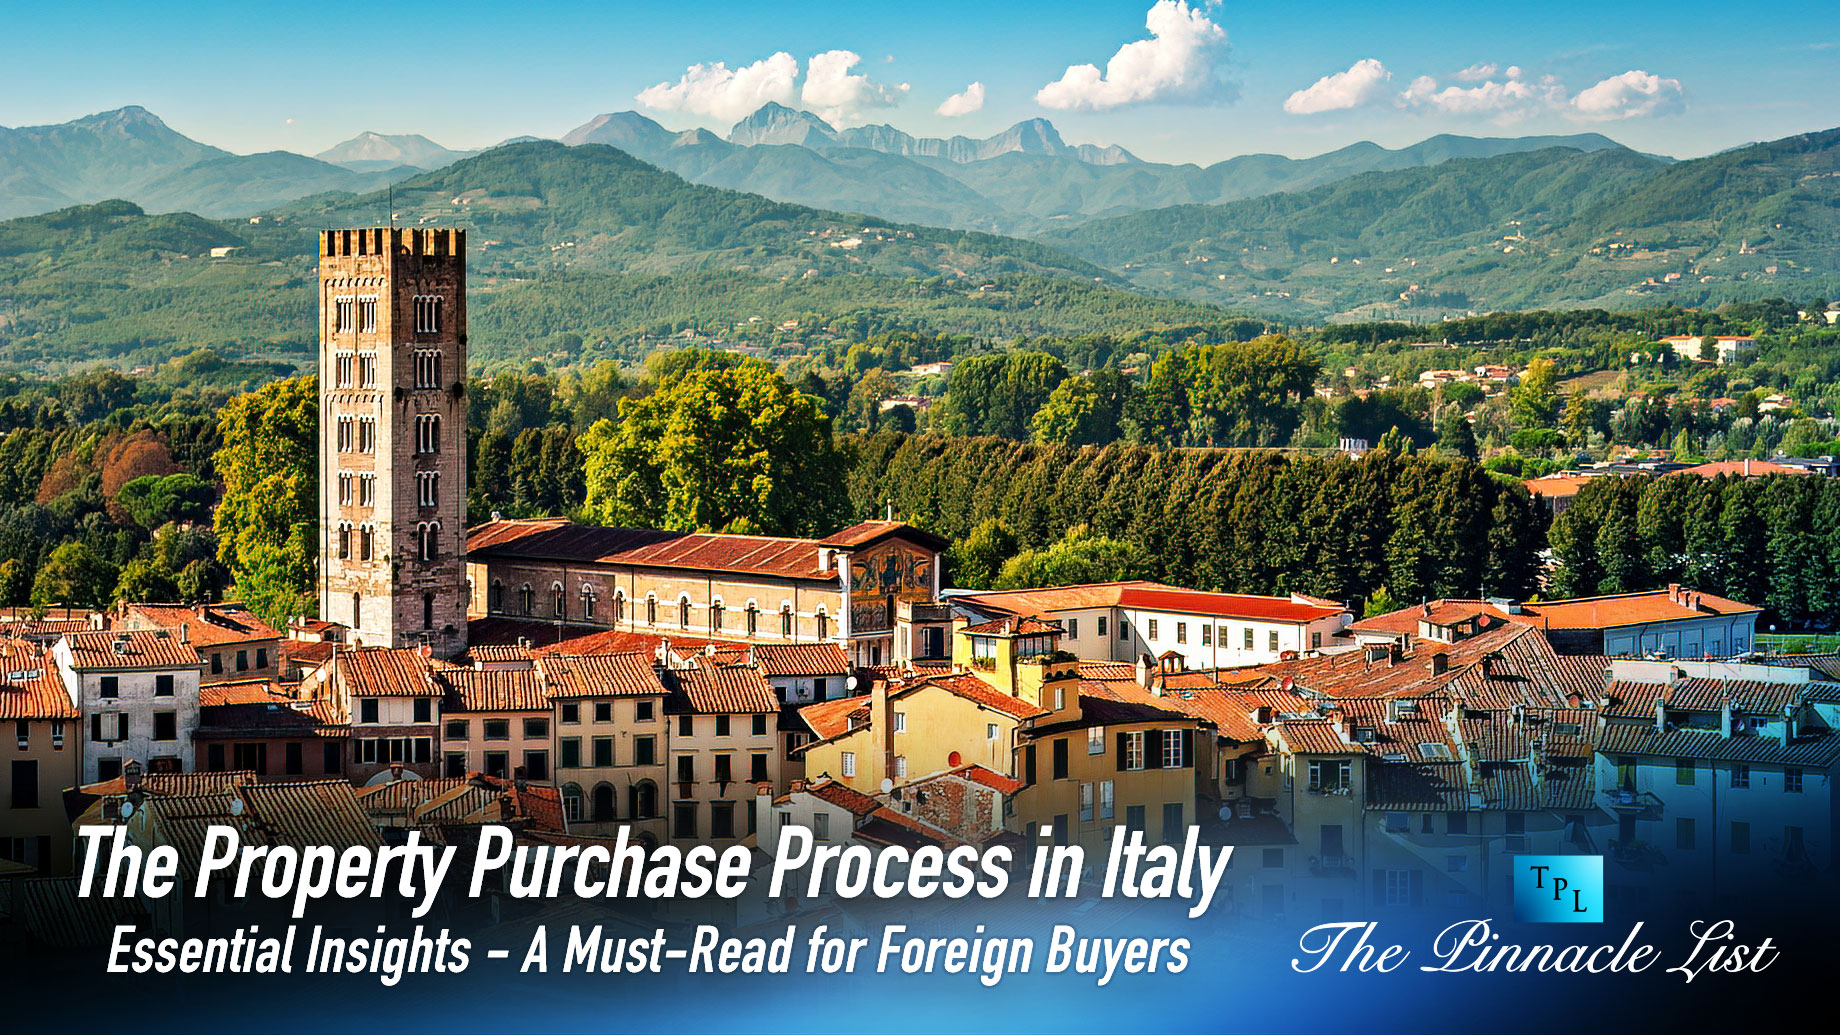 The Property Purchase Process in Italy: Essential Insights